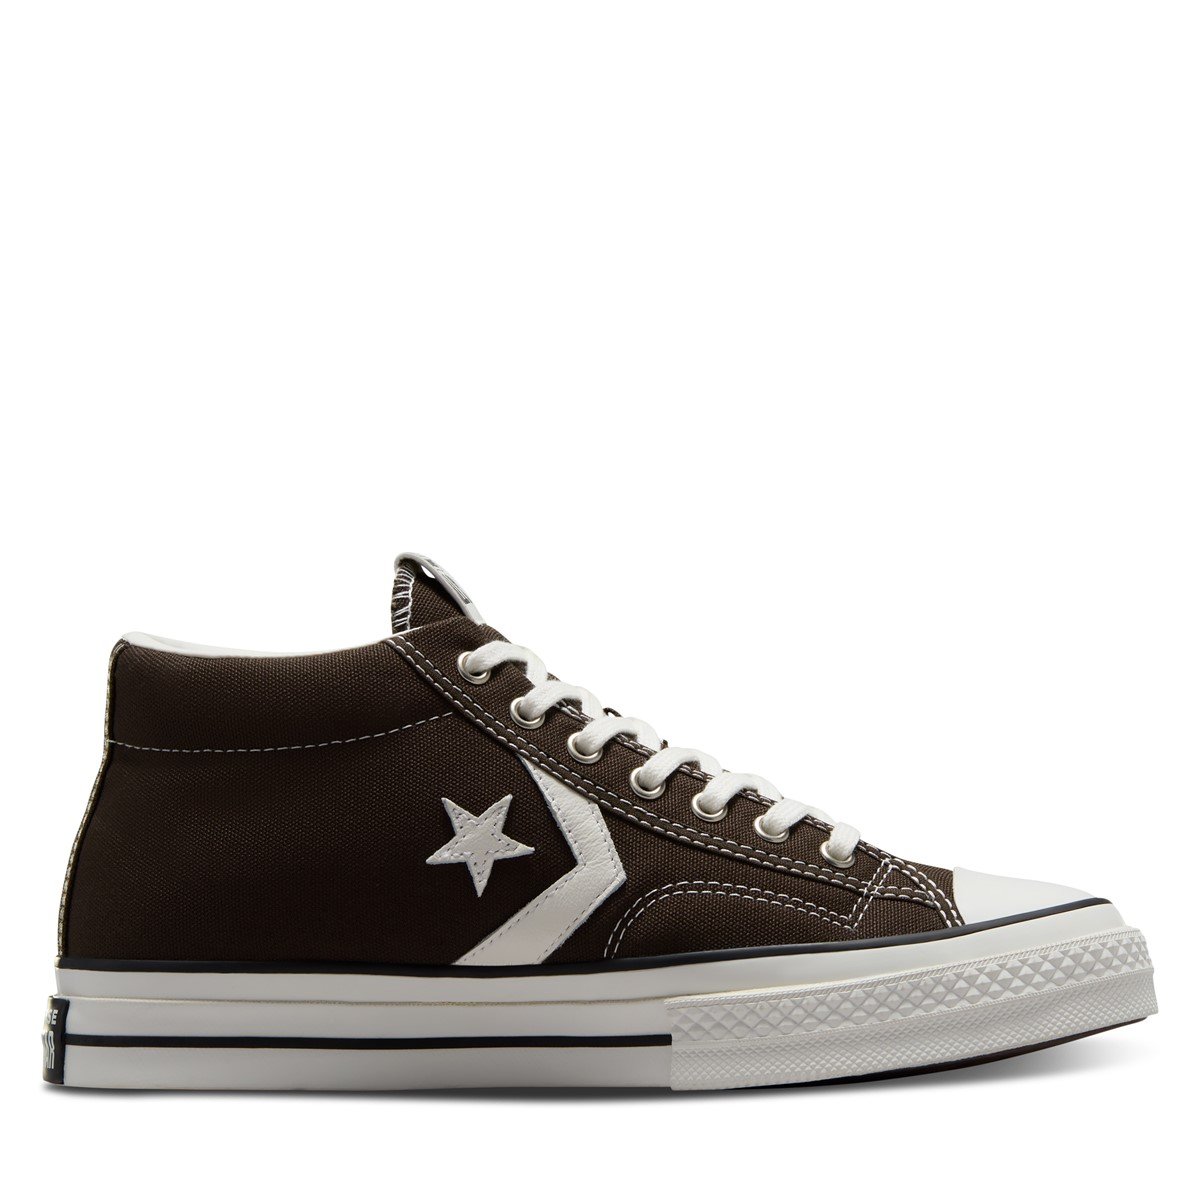 Star Player 76 Mid Sneakers in Brown/White